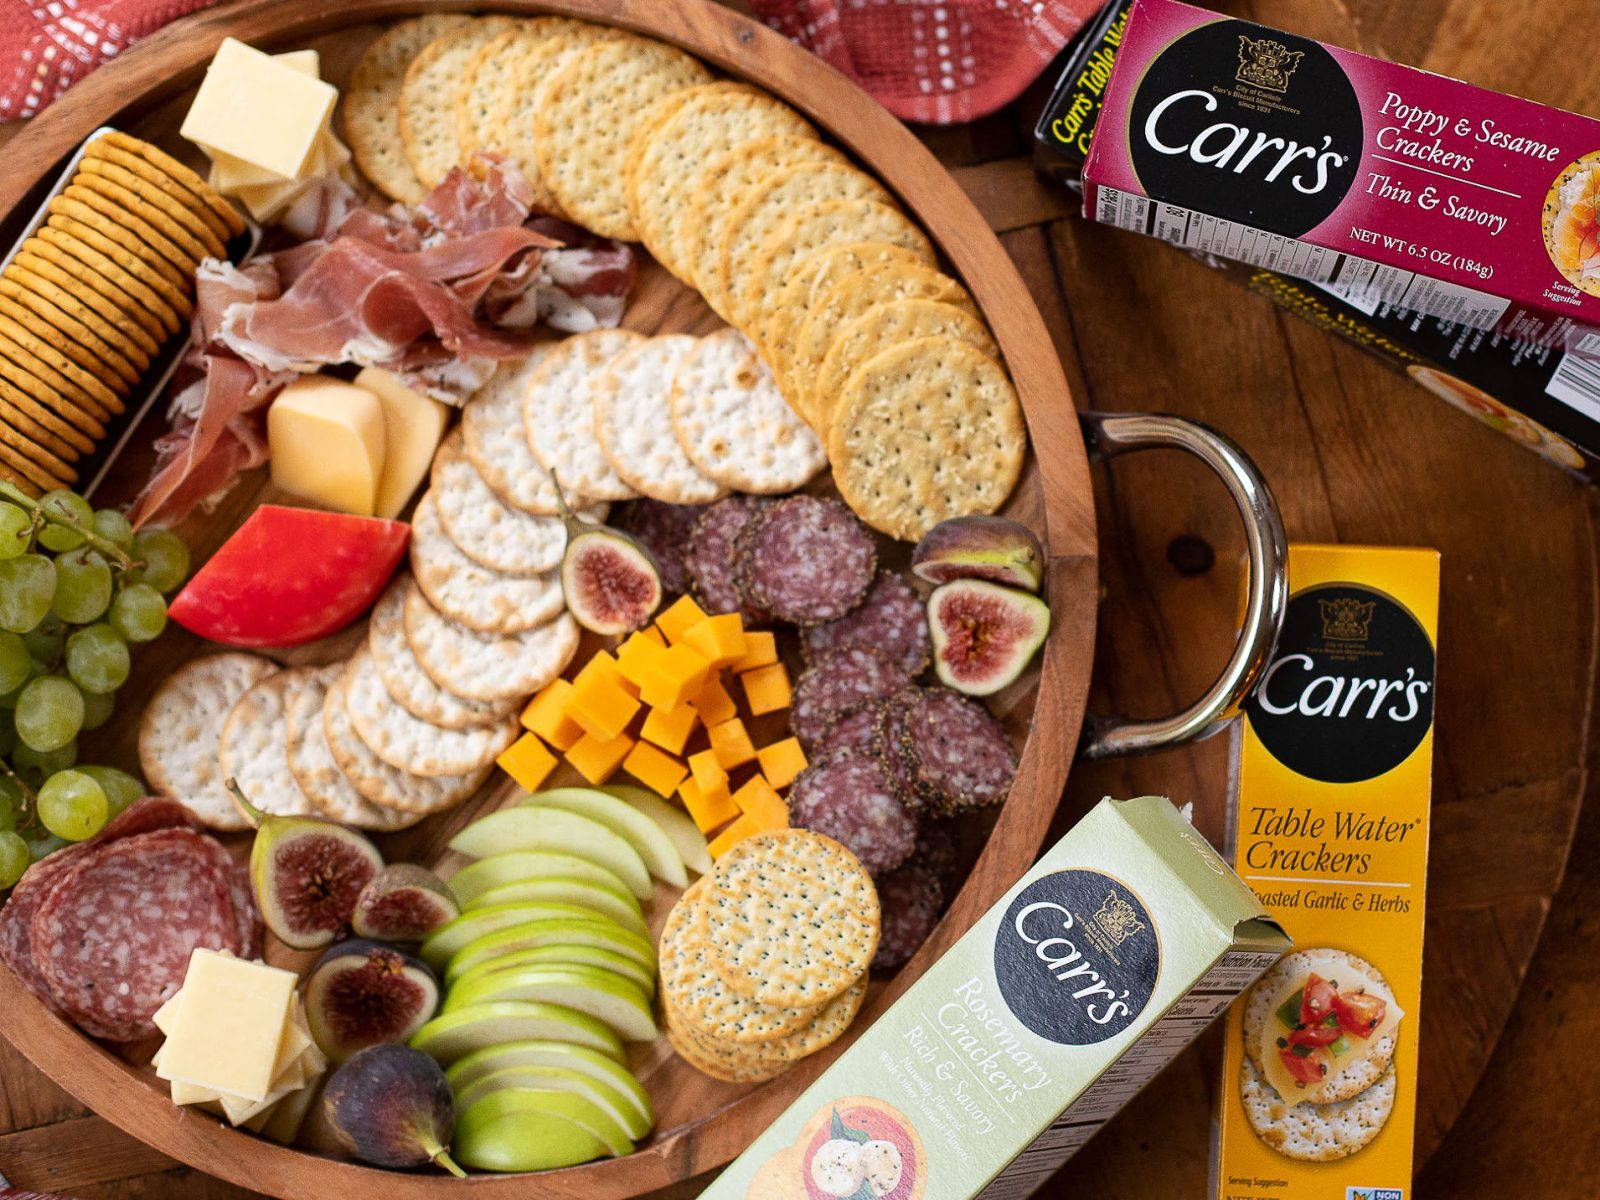 Cant Miss Deal On Carr’s Crackers & Cookies At Publix – Stock Up For the Holidays!